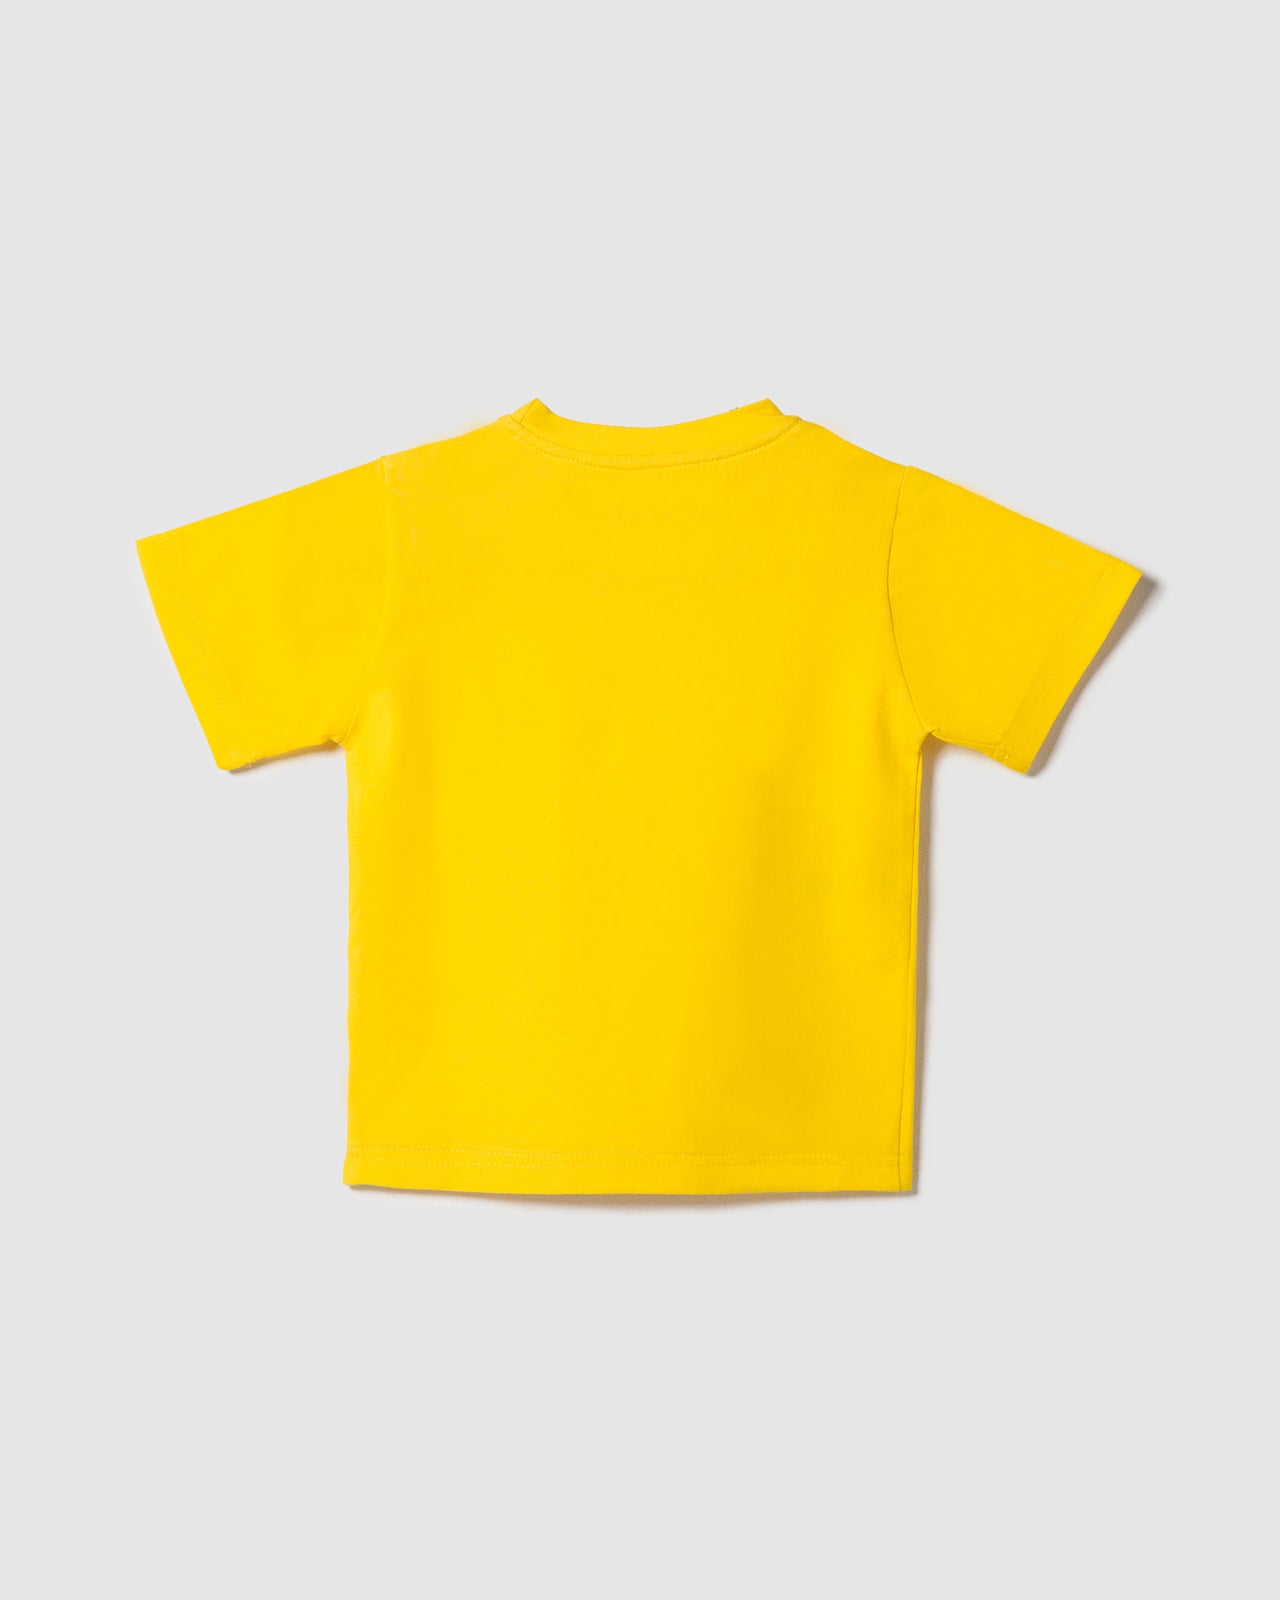 Embroidered “Exclusive” Yellow T-shirt